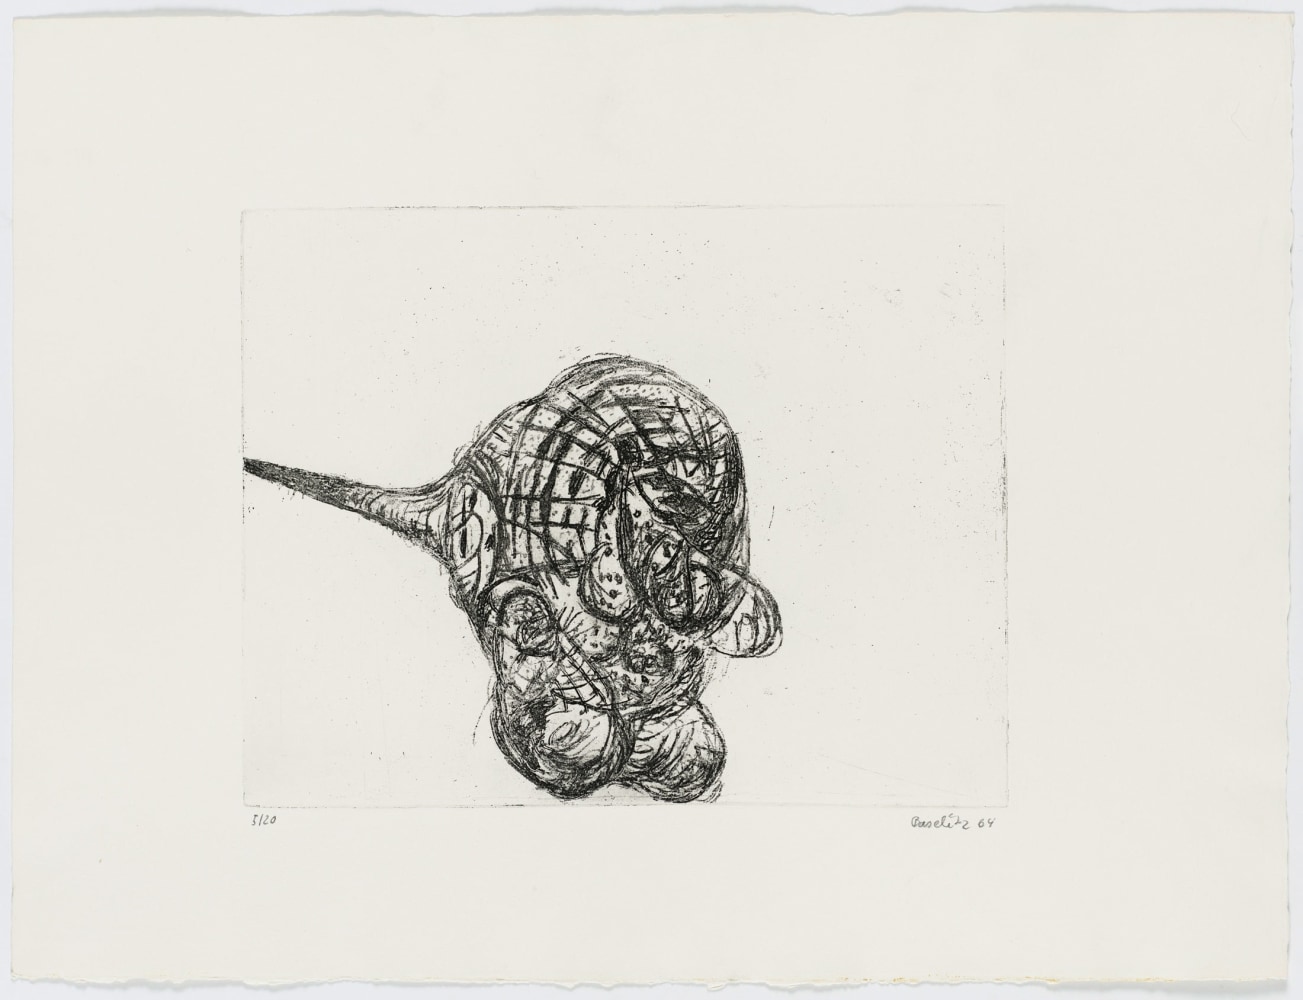 Georg Baselitz
Kopf [Head], 1964
Signed/Dated: 5/20; Baselitz 64
Etching and soft-ground etching on zinc plate; on copper printing paper
Image size: 9 5/8 x 12 1/4 inches (24.4 x 31.1 cm)
Paper size: 15 5/8 x 20 5/8 inches (39.7 x 52.4 cm)
Framed dimensions: 18 7/8 x 24 3/4 inches (47.9 x 62.9 cm)
&amp;copy; Georg Baselitz 2021
Photo:&amp;nbsp;&amp;copy;&amp;nbsp;bernhardstrauss.com